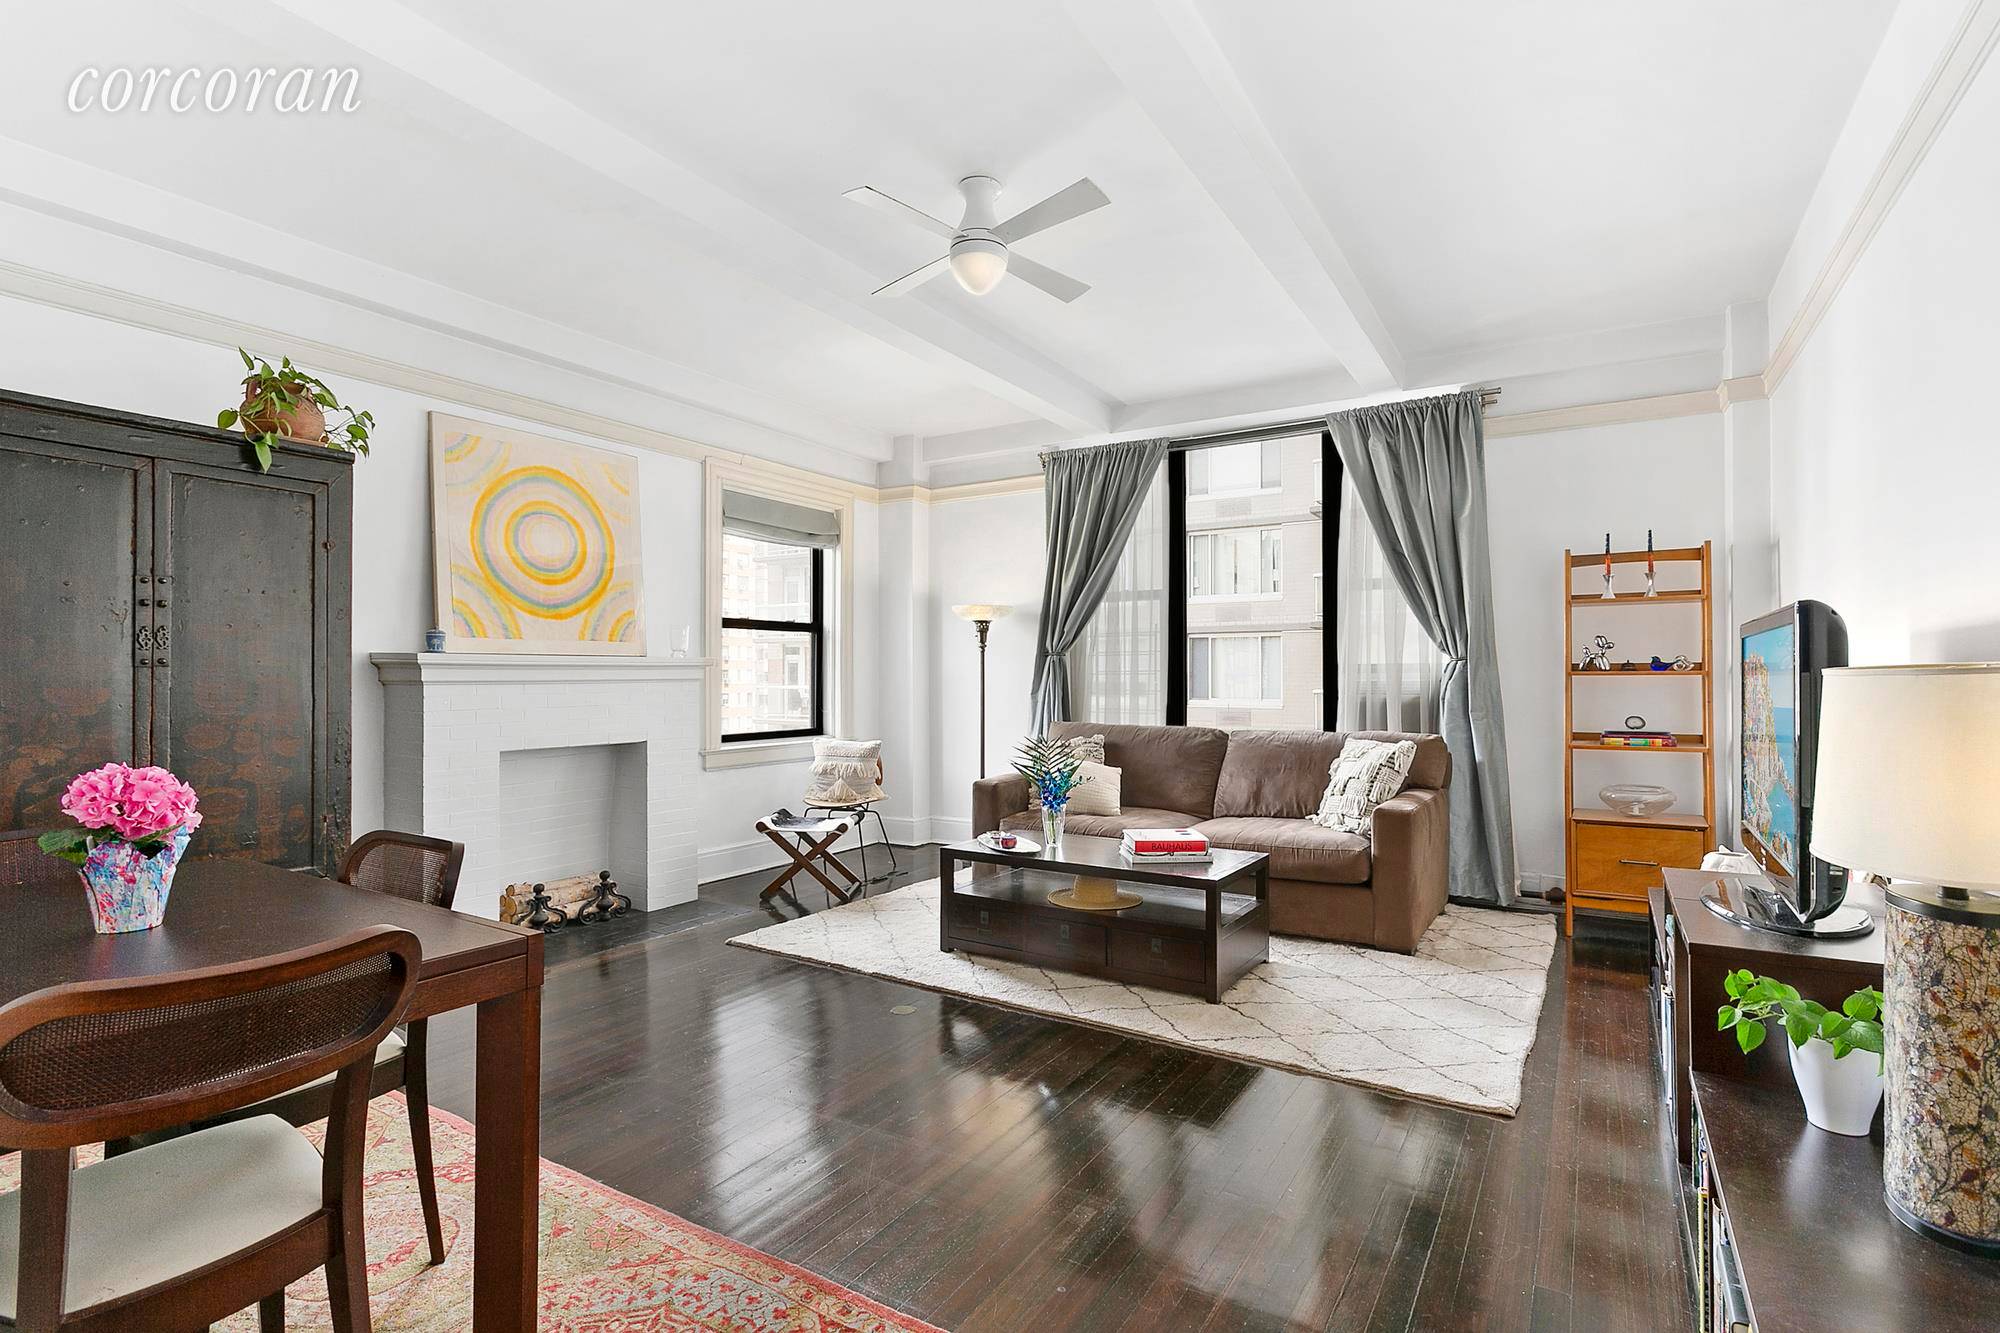 Located on one of the most stately and picturesque blocks on the Upper West Side, this wonderful prewar apartment is truly an incredible opportunity.